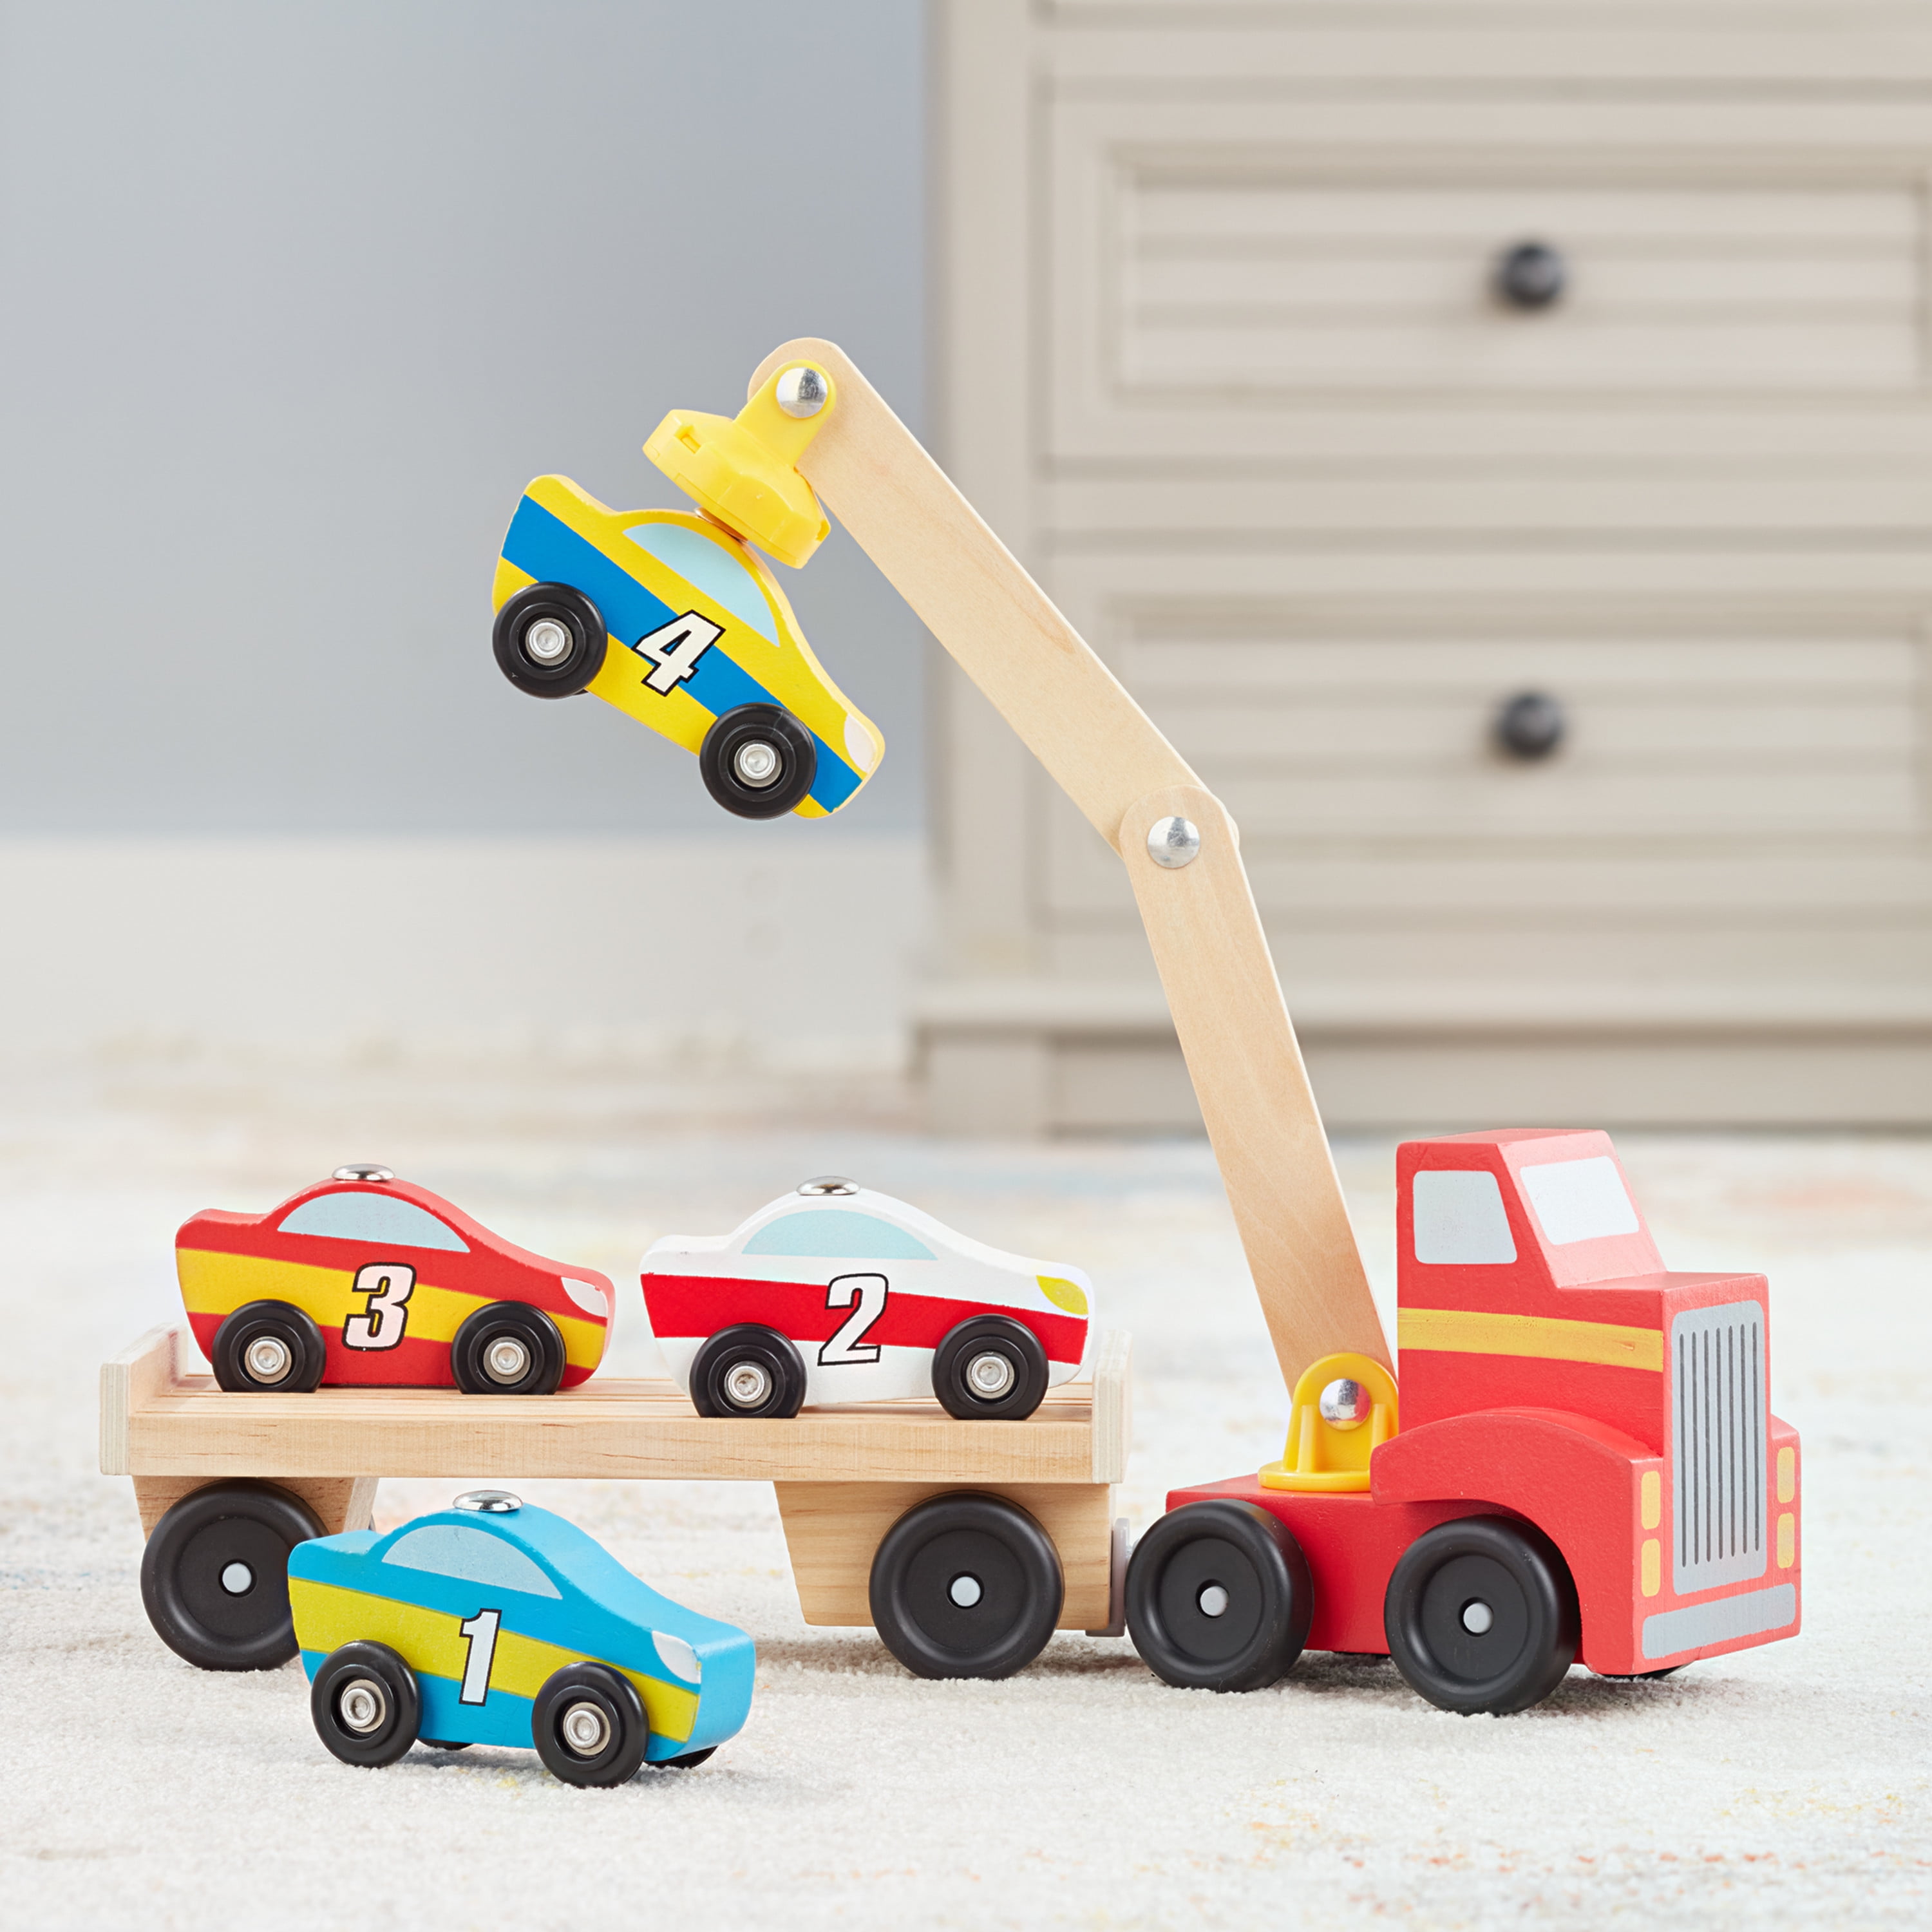 NEW MELISSA AND DOUG BUILDERS TOW TRUCK WOOD MODEL KIT